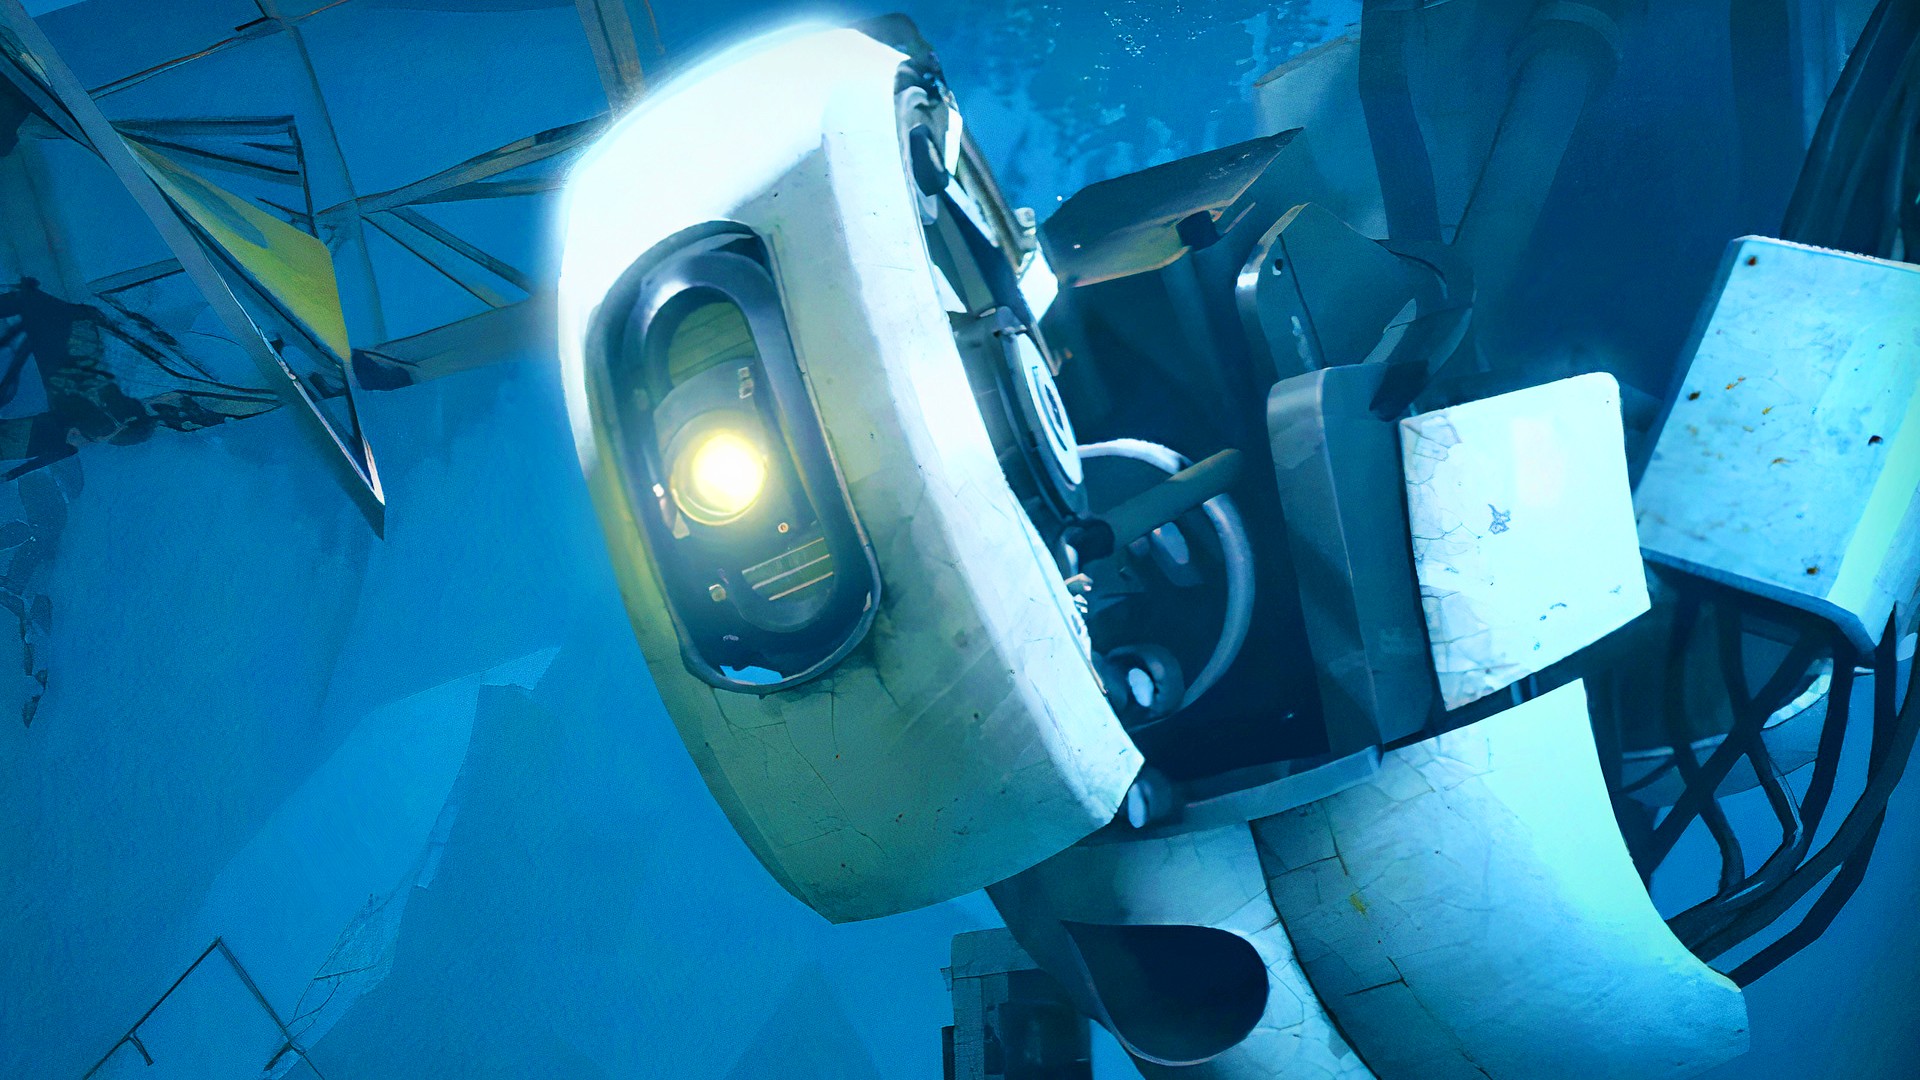 Portal 3 has “my blessing” says GLaDOS, telling fans to email Valve